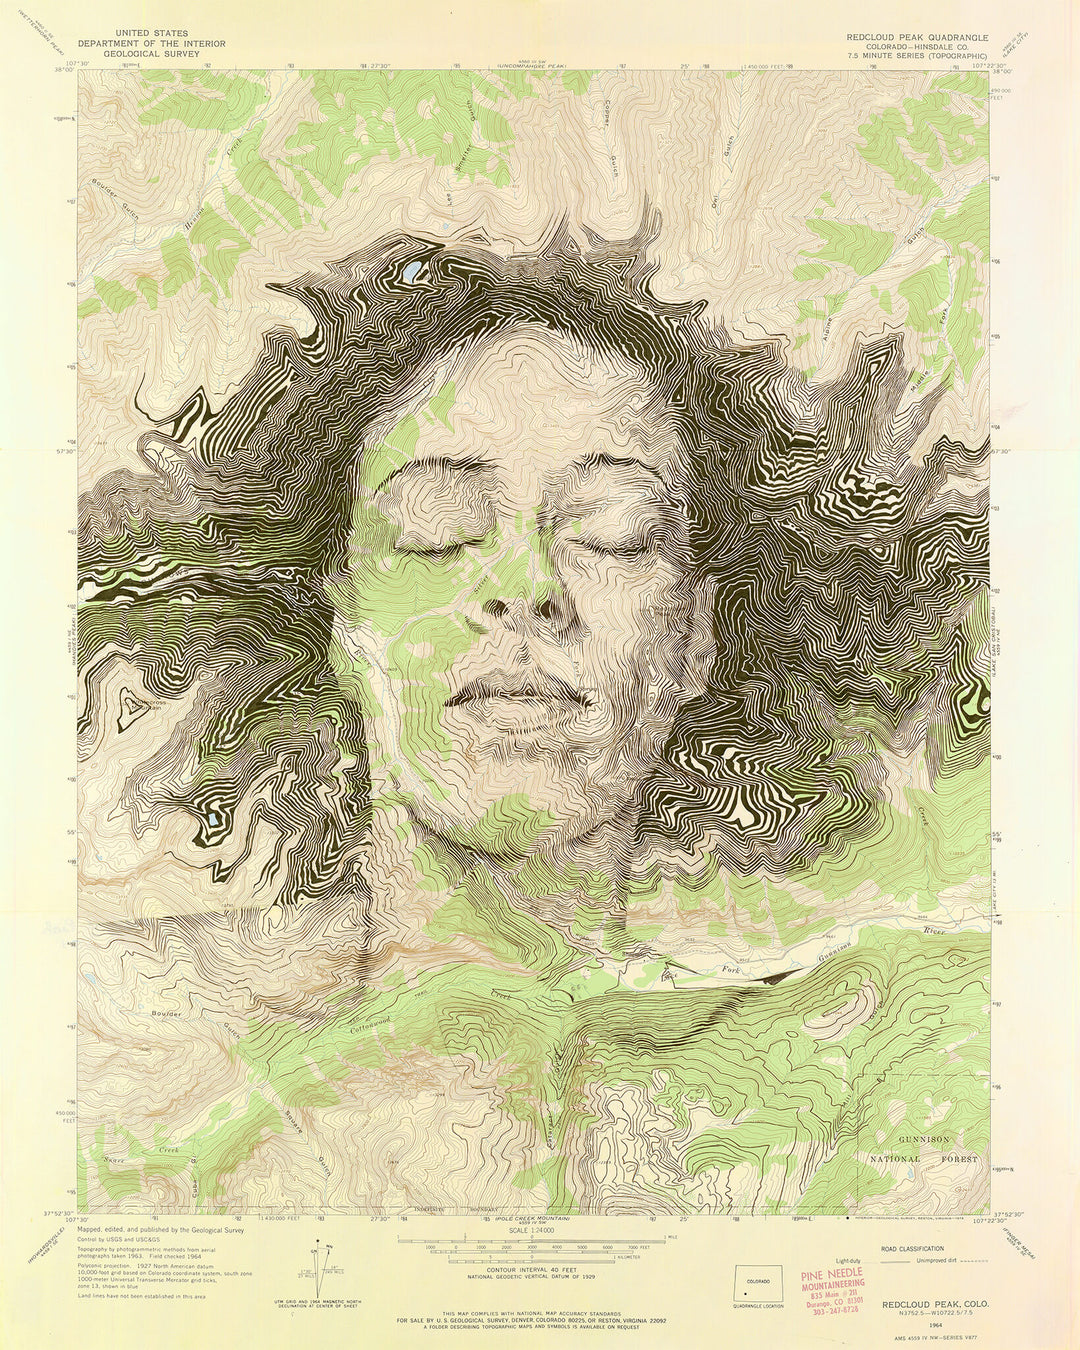 A limited edition map of a woman with her eyes closed, inspired by the scenic beauty of the San Juan Mountains. Created by artist Ed Fairburn | "San Juan Mountains" by Ed Fairburn.